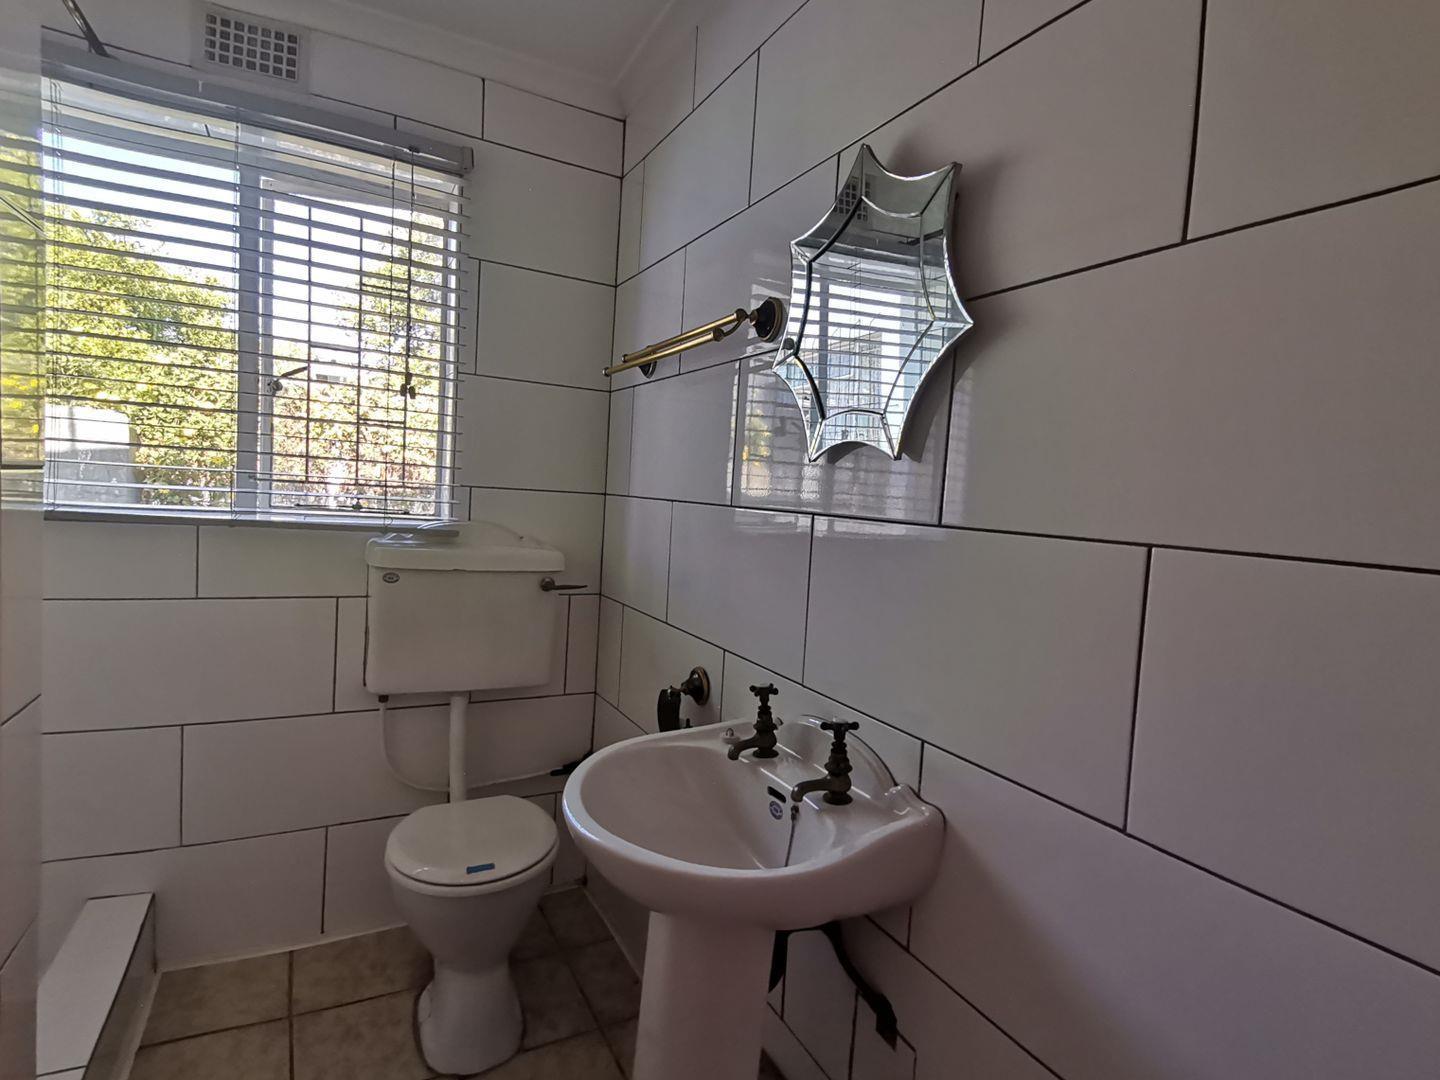 To Let 1 Bedroom Property for Rent in Belmont Park Western Cape